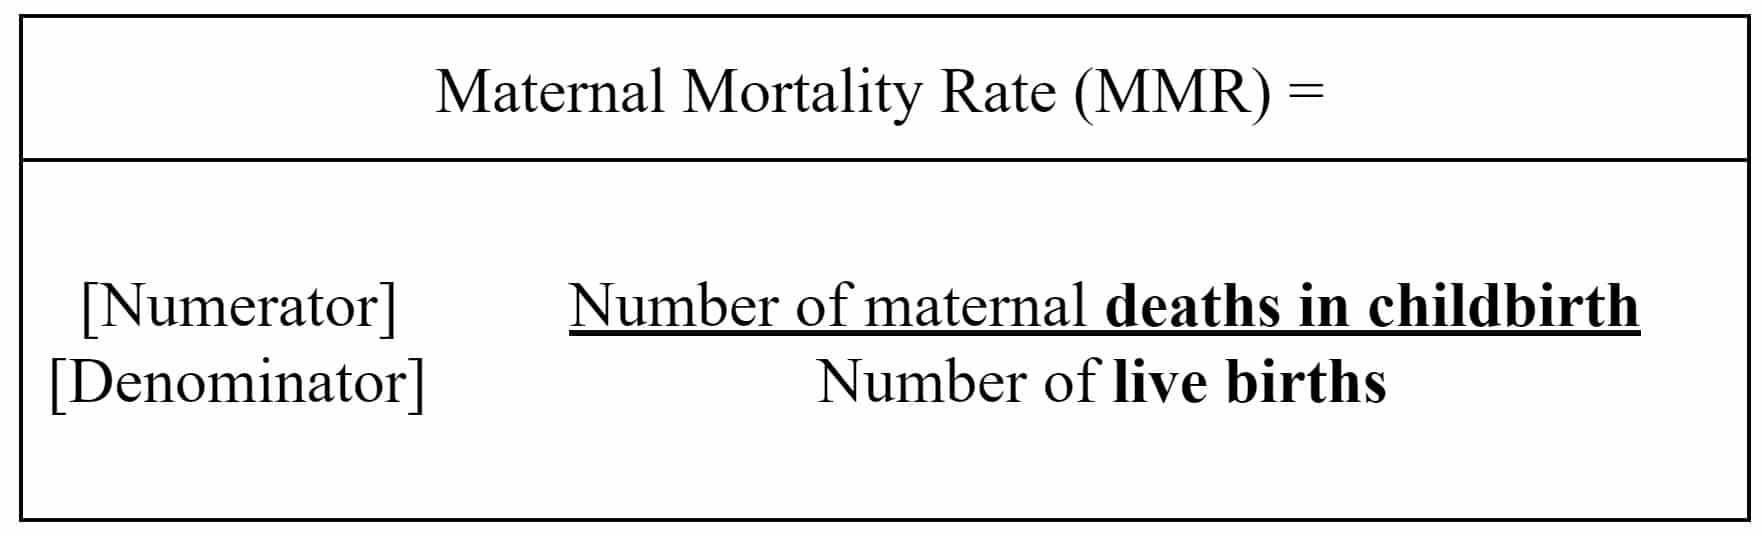 Math equation - Maternal Mortality Rate (MMR) equals Number of maternal deaths in childbirth divided by number of live births